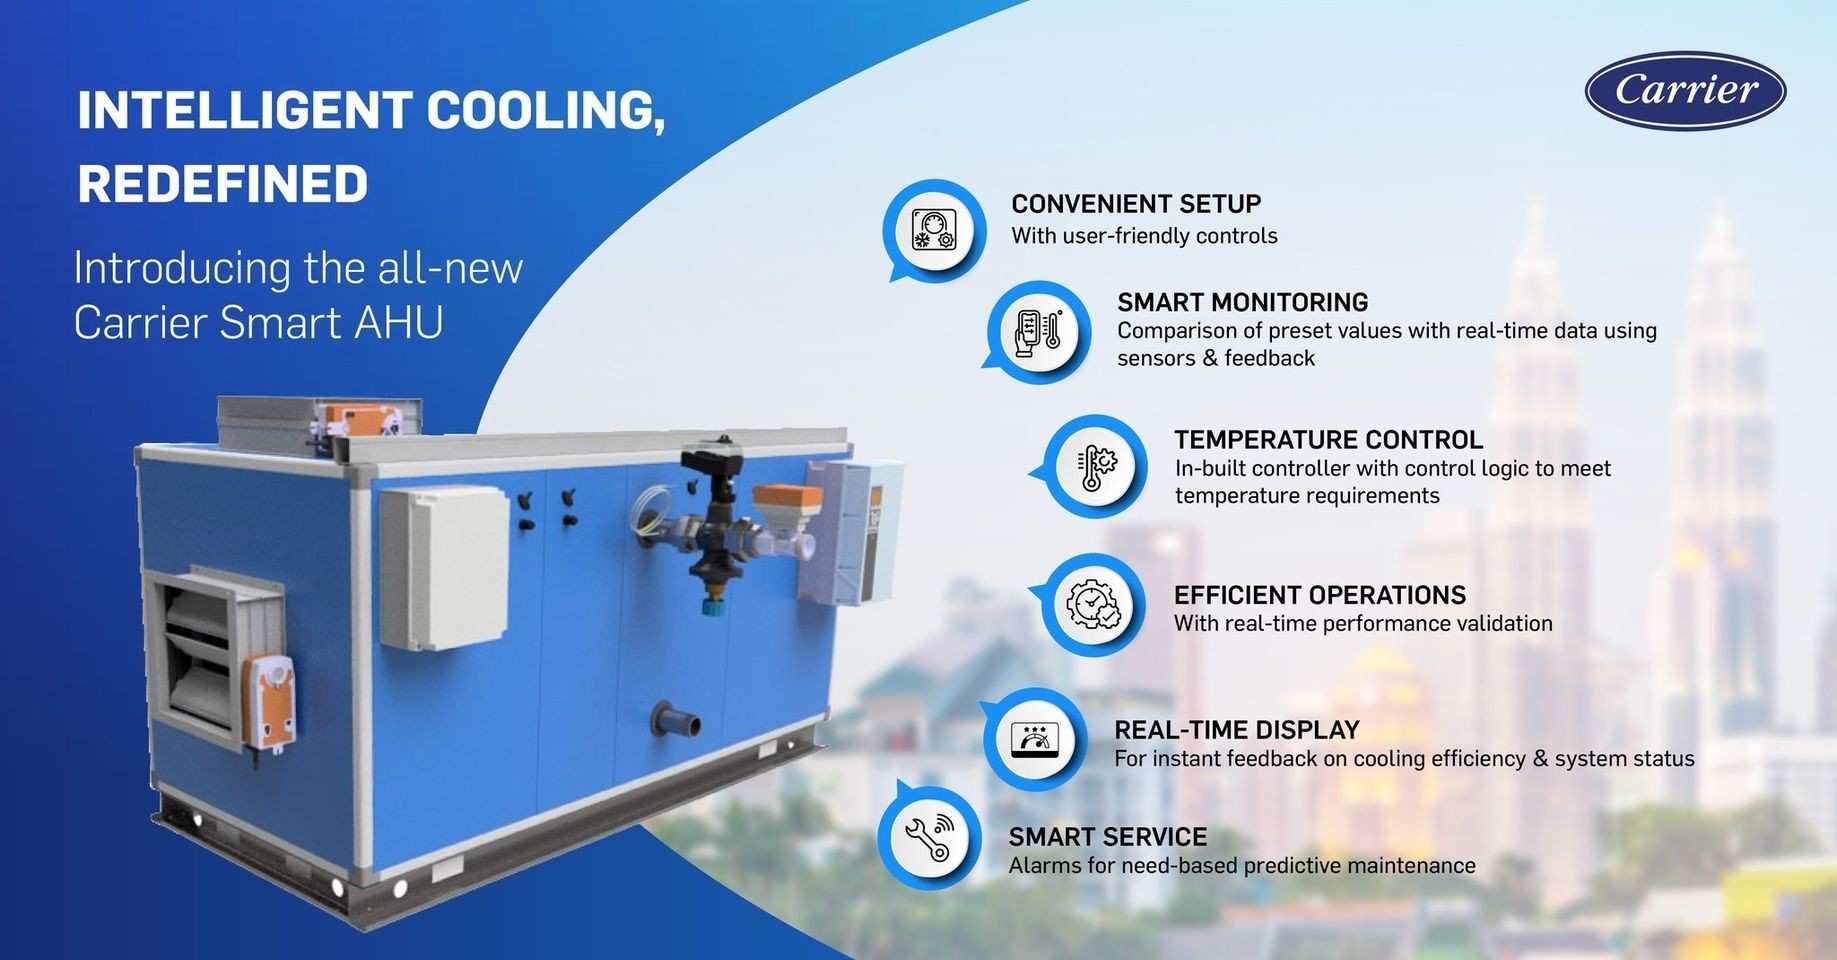 Innovation Takes Flight: Carrier Malaysia Launches Smart Air Handling Units